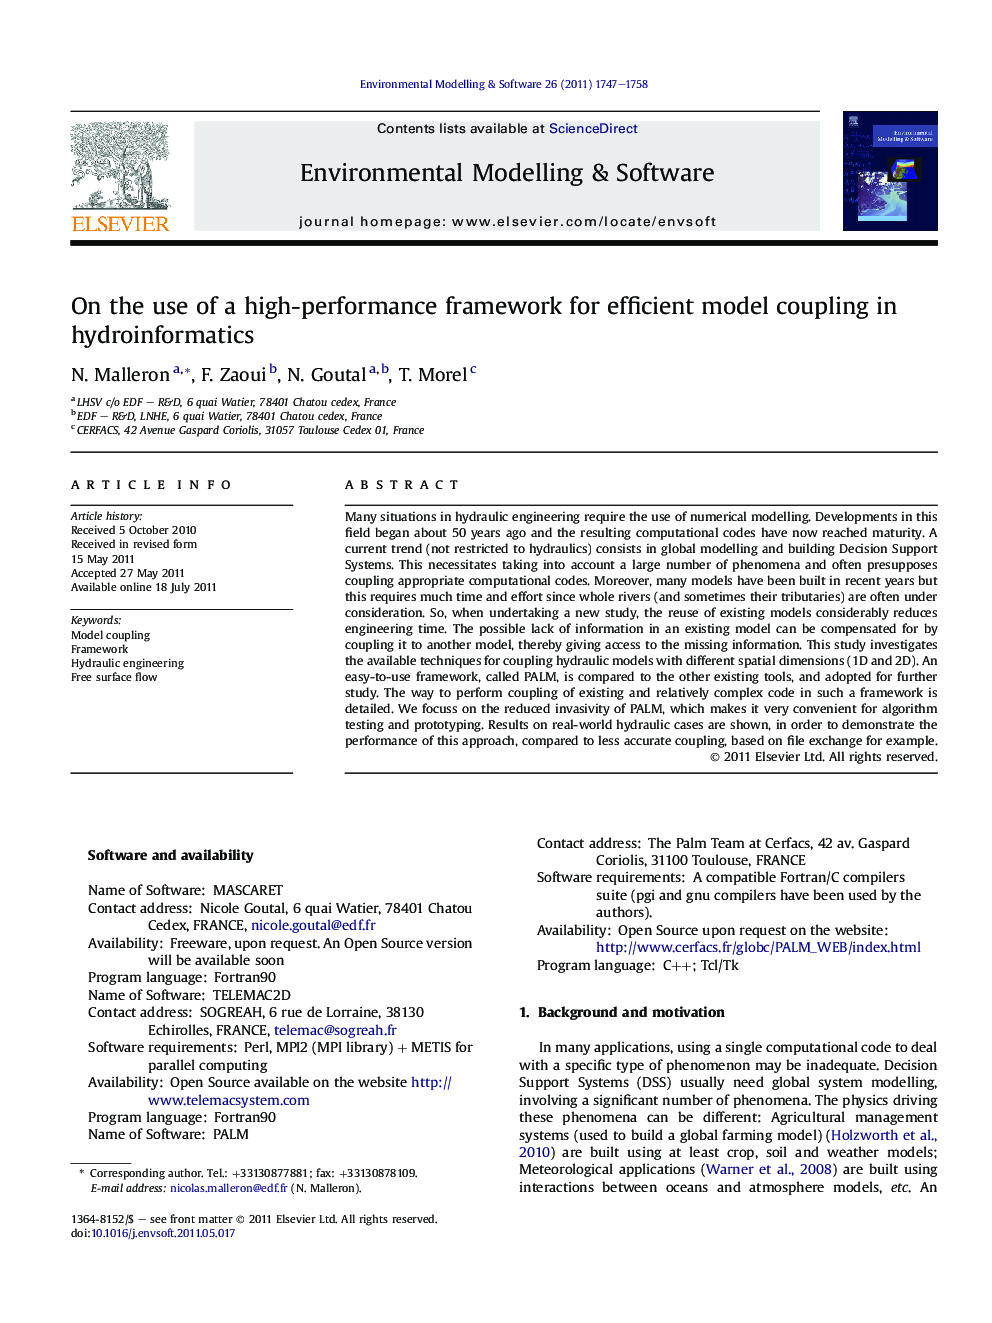 On the use of a high-performance framework for efficient model coupling in hydroinformatics